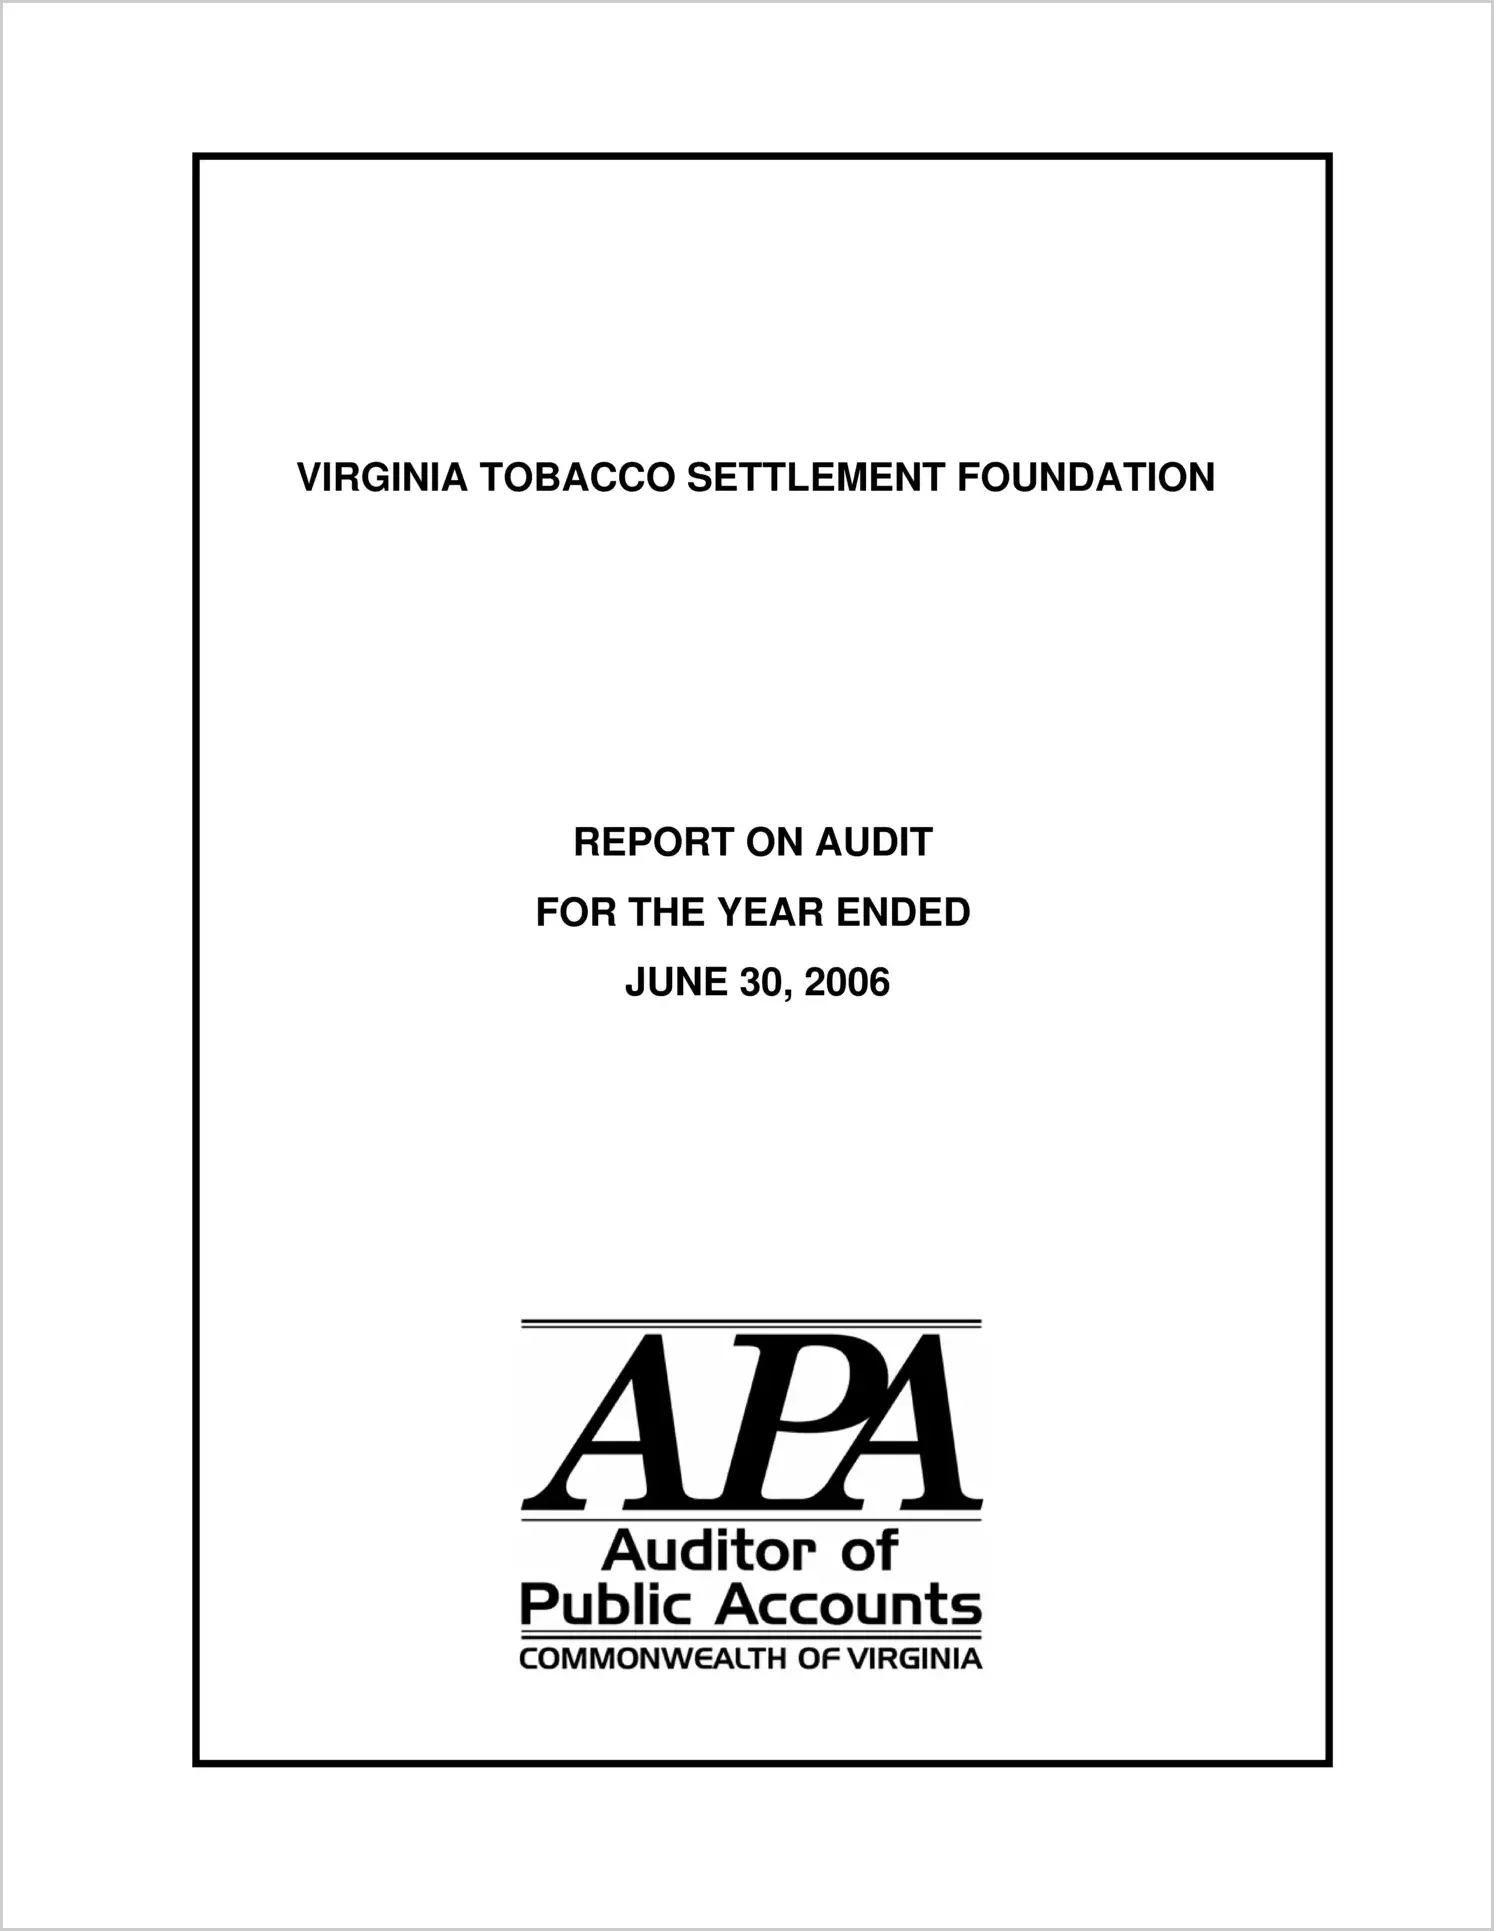 Virginia Tobacco Settlement Foundation for the year ended June 30, 2006